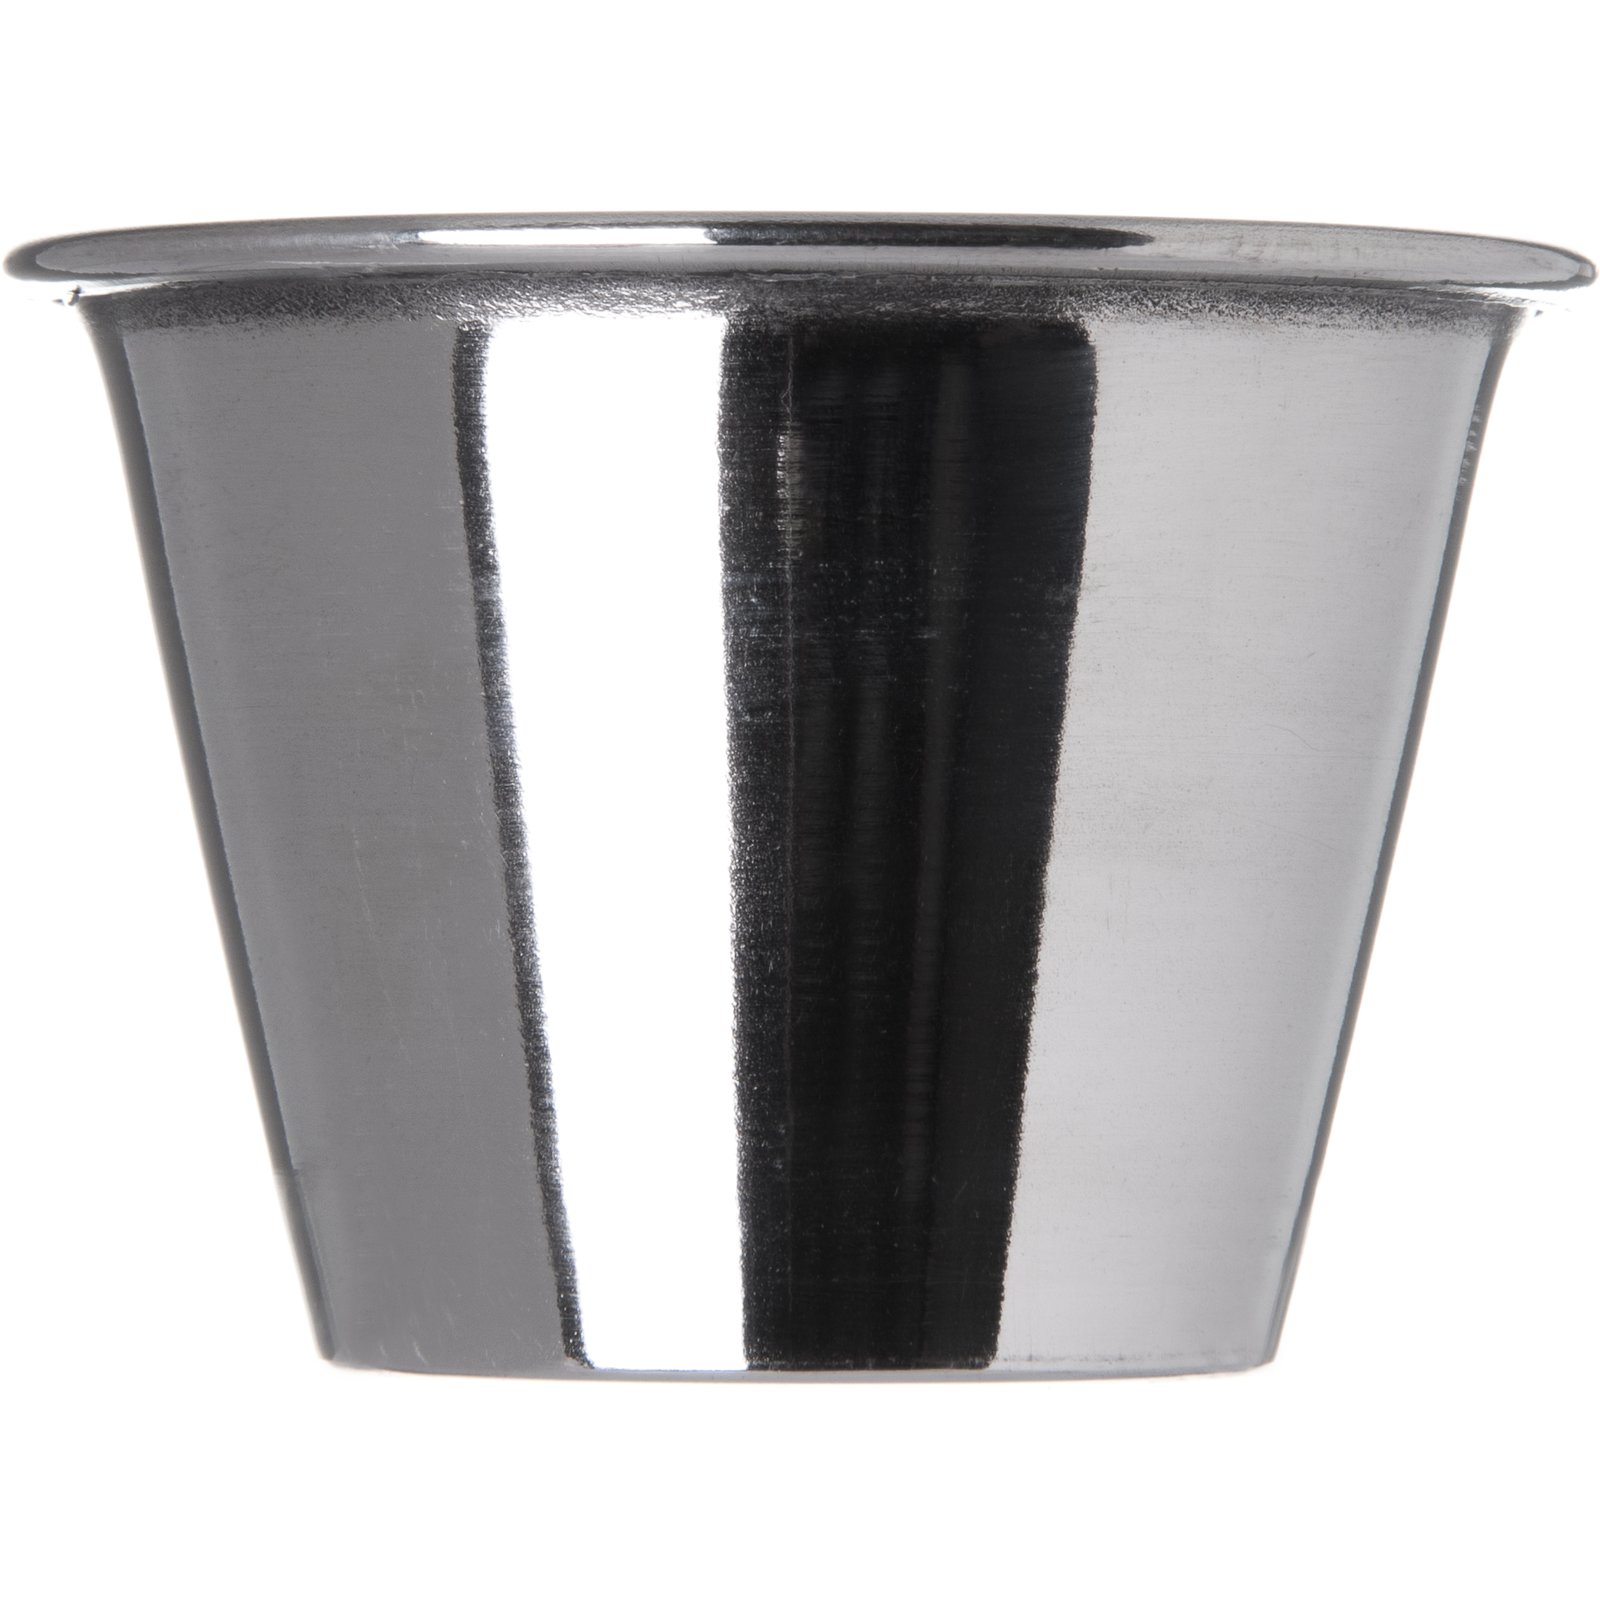 Sauce Cups Stainless Steel - 2.5 oz. - DZ SCP-25 NRE # 011305